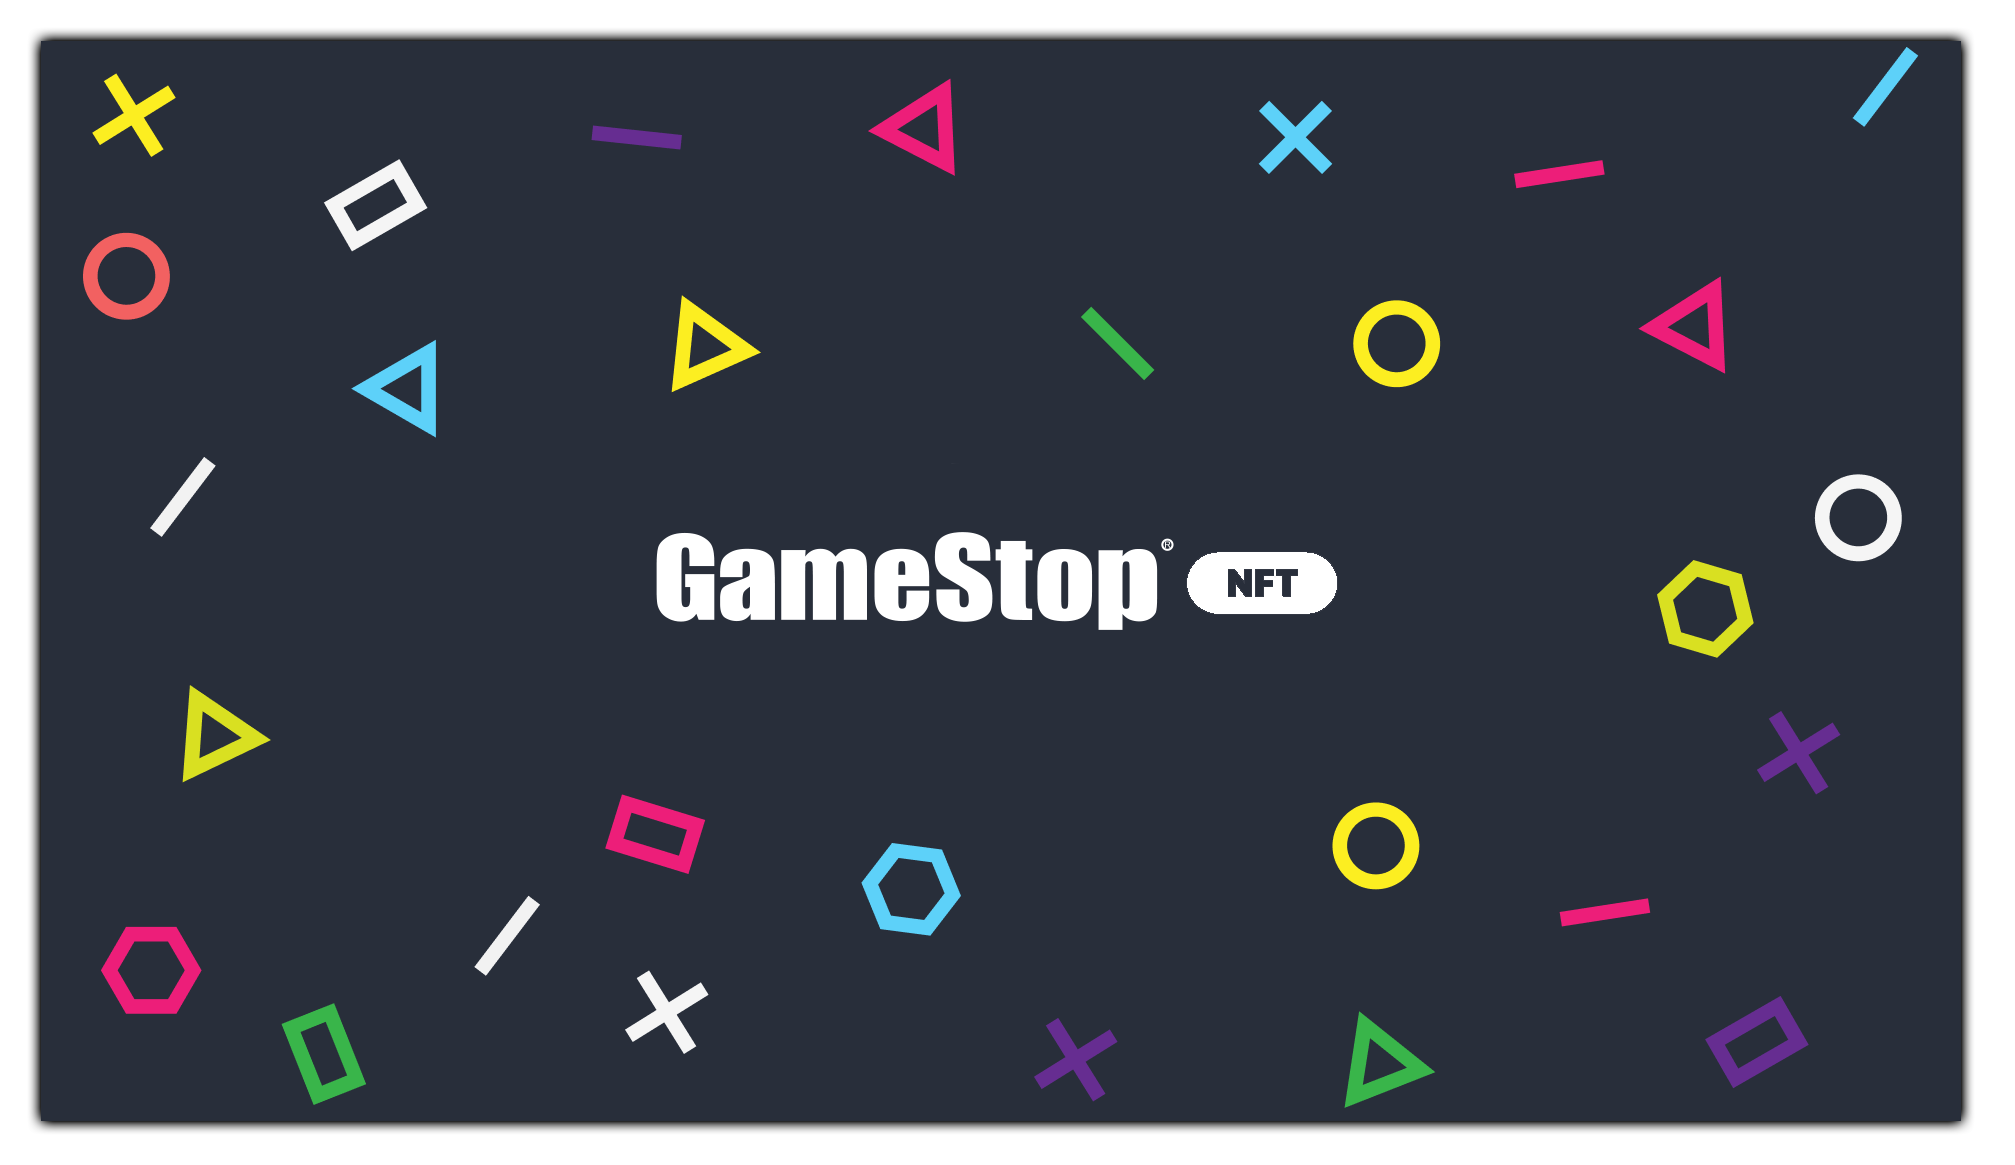 Block-chain start-up Immutable X and GameStop partner for NFT marketplace -  CIO News